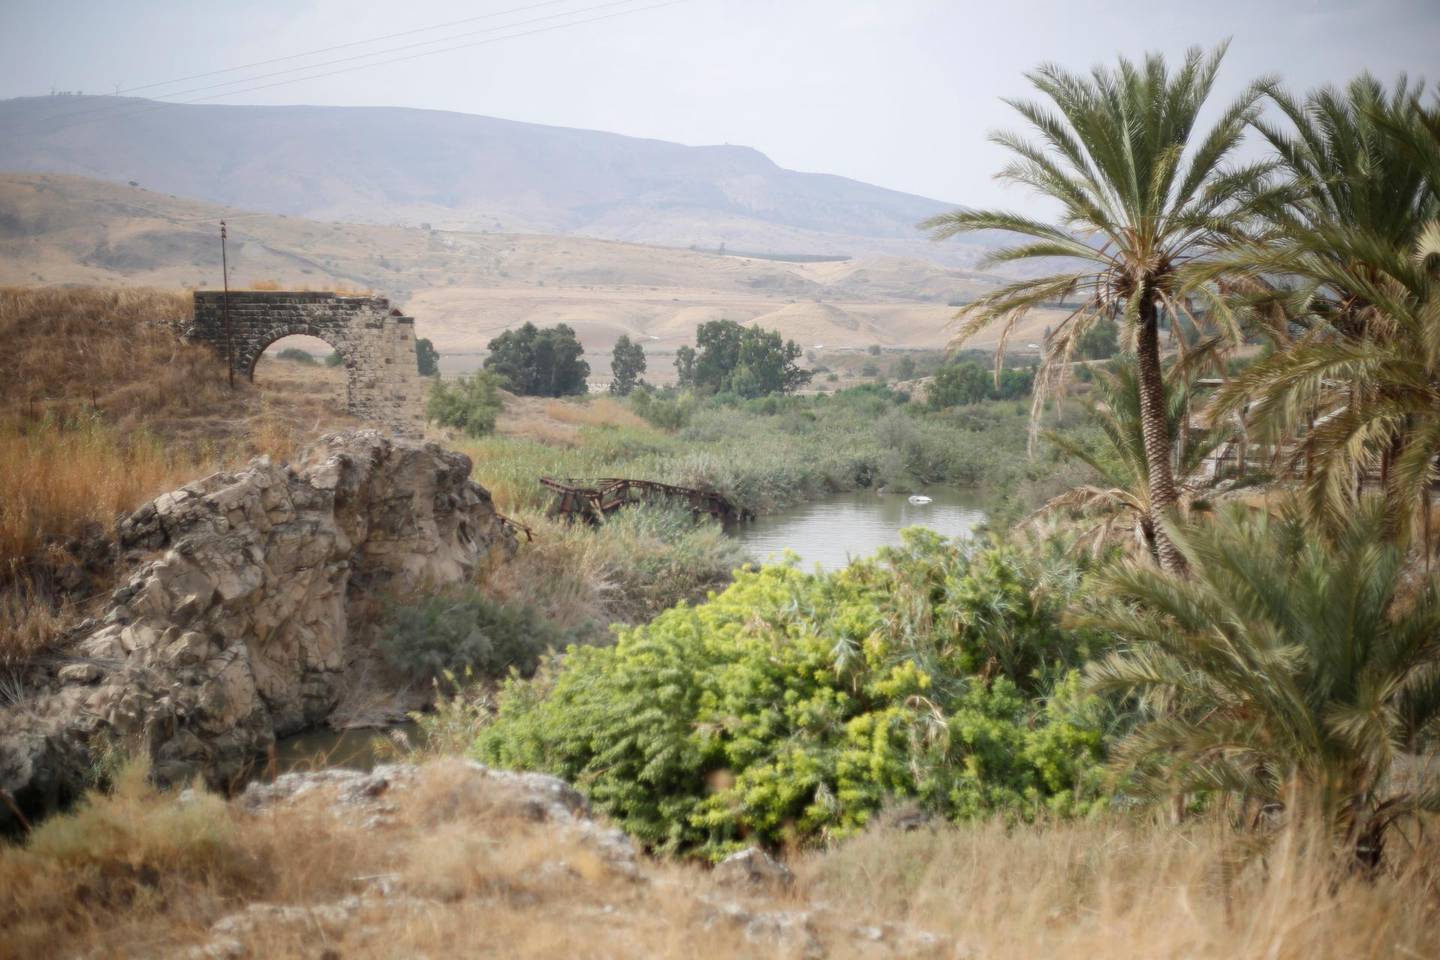 The Jordan river flows in the Jordan valley area called Baqura, Jordanian territory that was leased to Israel under the 1994 peace agreement between the two countries, Monday, Oct. 22, 2018. Jordan's King Abdullah II on Sunday said he has decided not to renew the lease on two small areas of Baqura and Ghamr, that was part of his country's landmark peace treaty with Israel. The leases expire next year after 25 years. (AP Photo/Ariel Schalit)